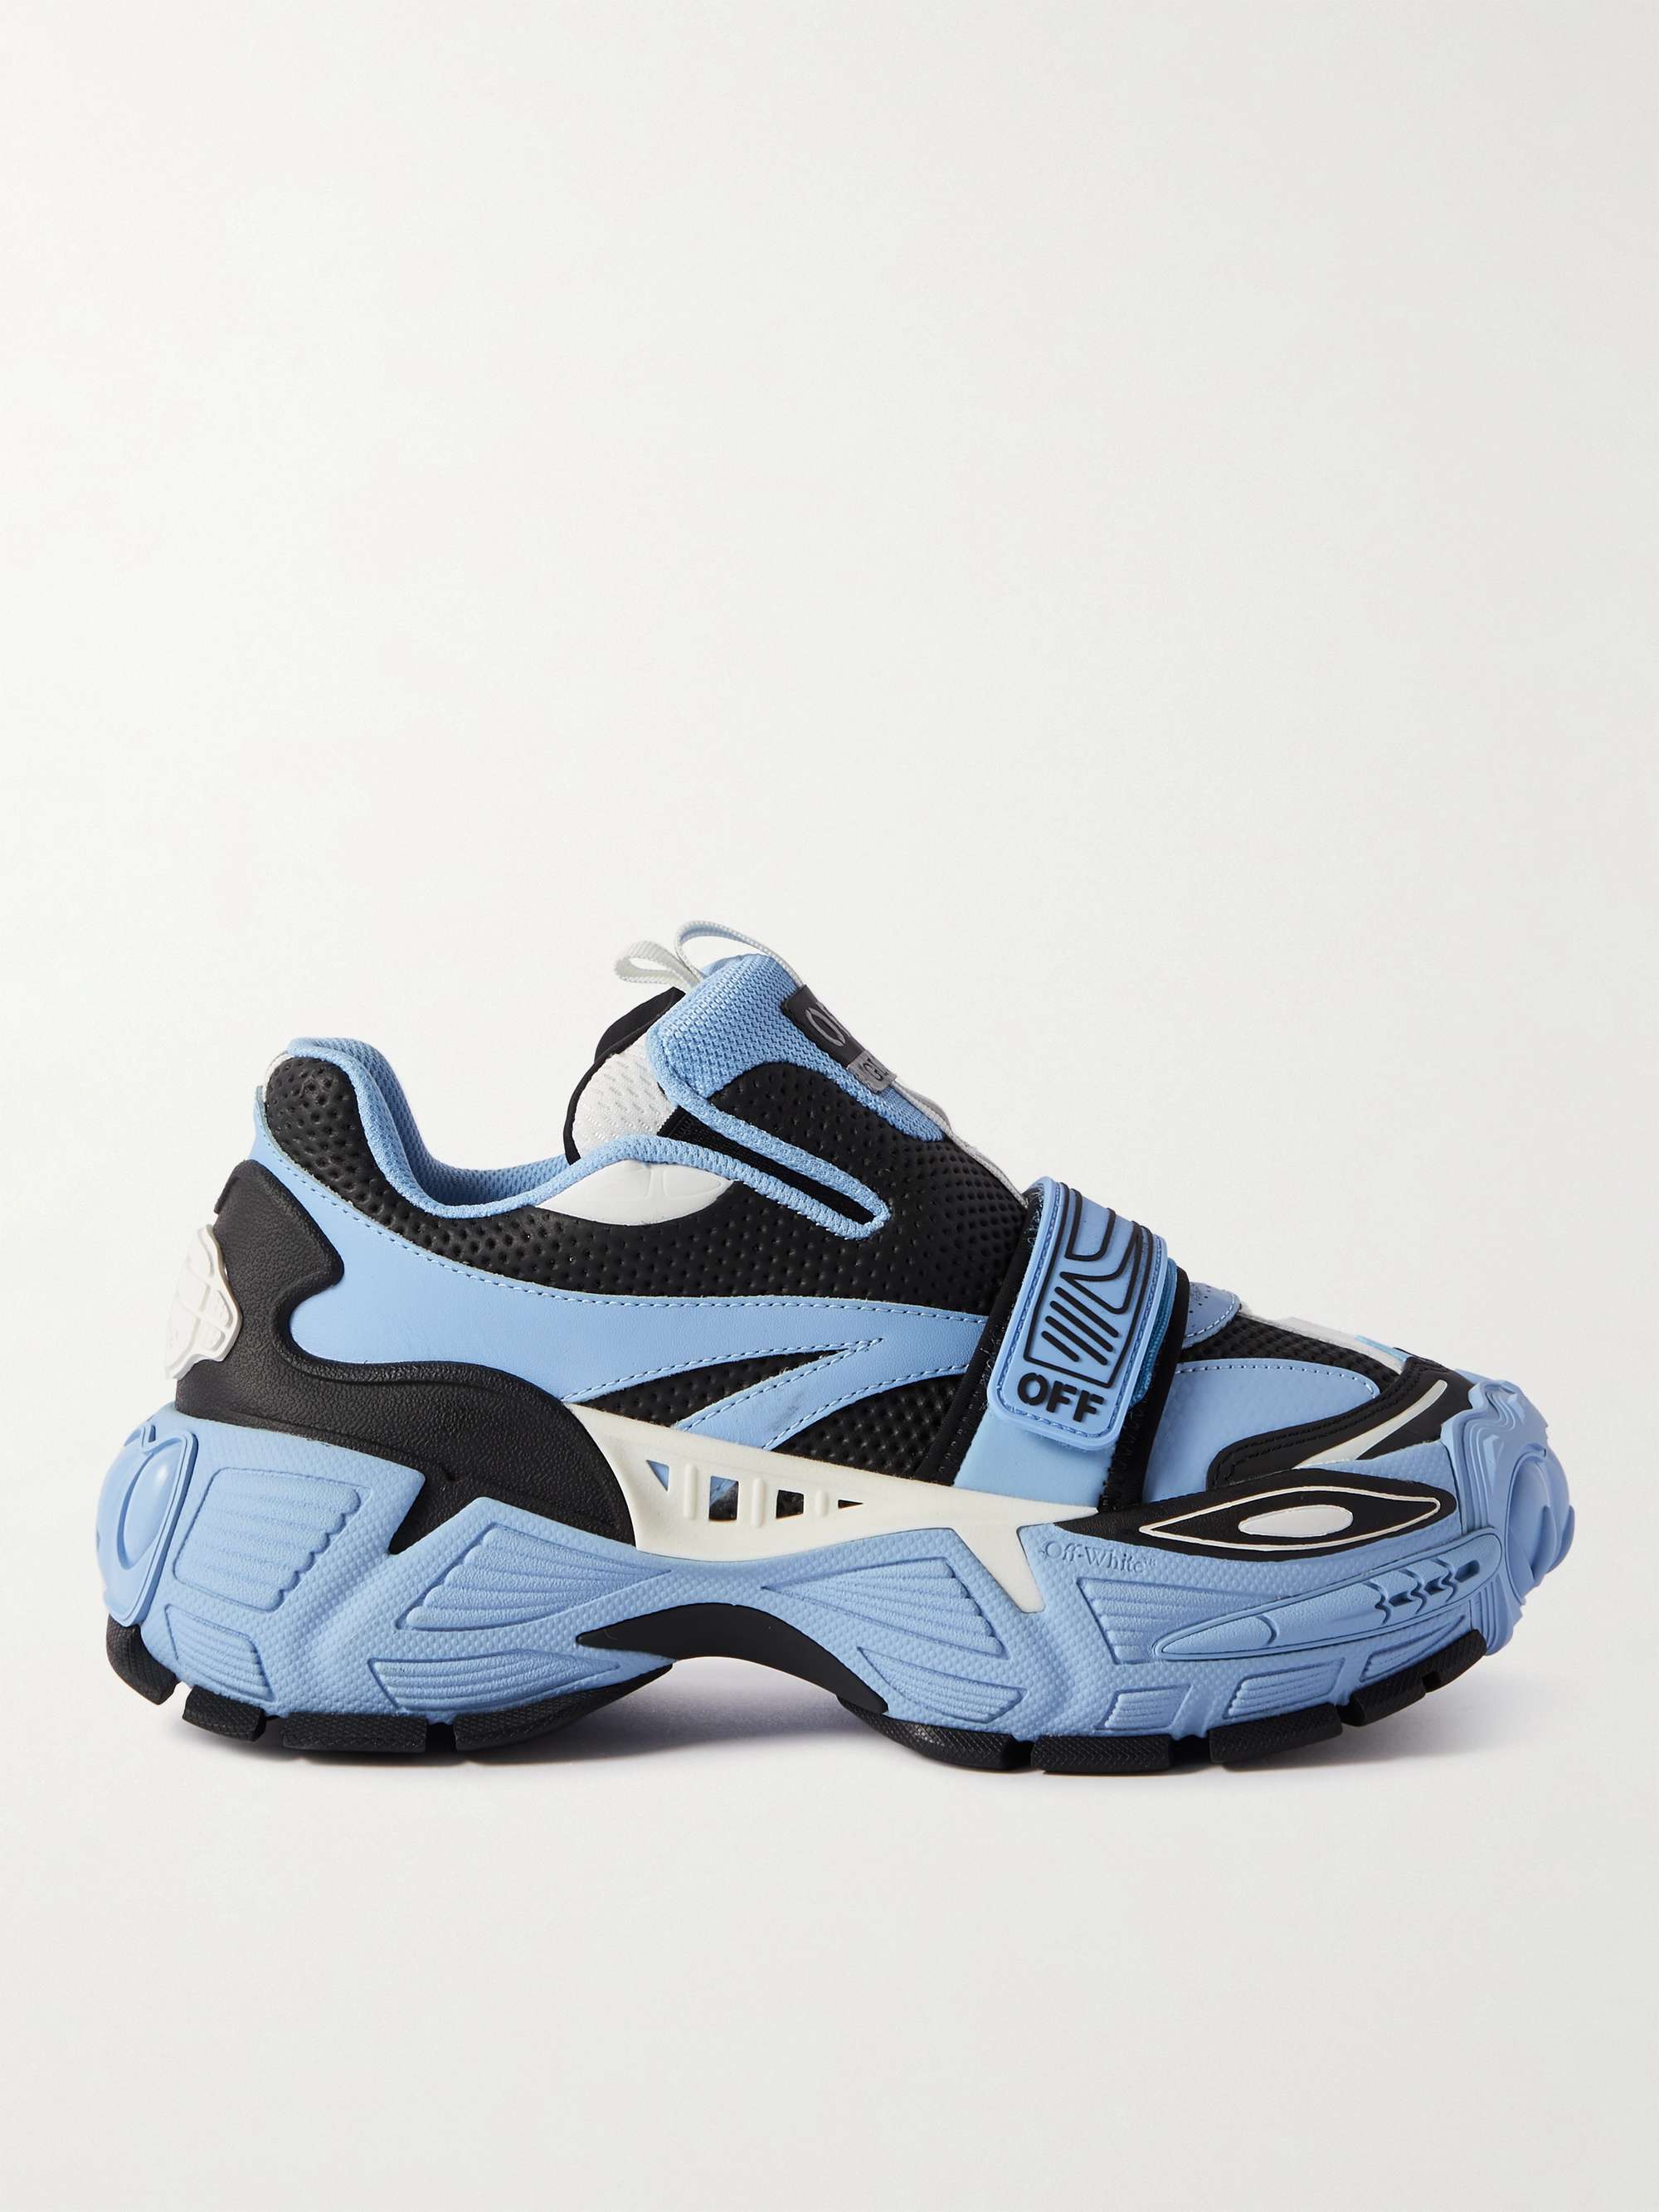 OFF-WHITE Glove Leather and Mesh Sneakers for Men | MR PORTER